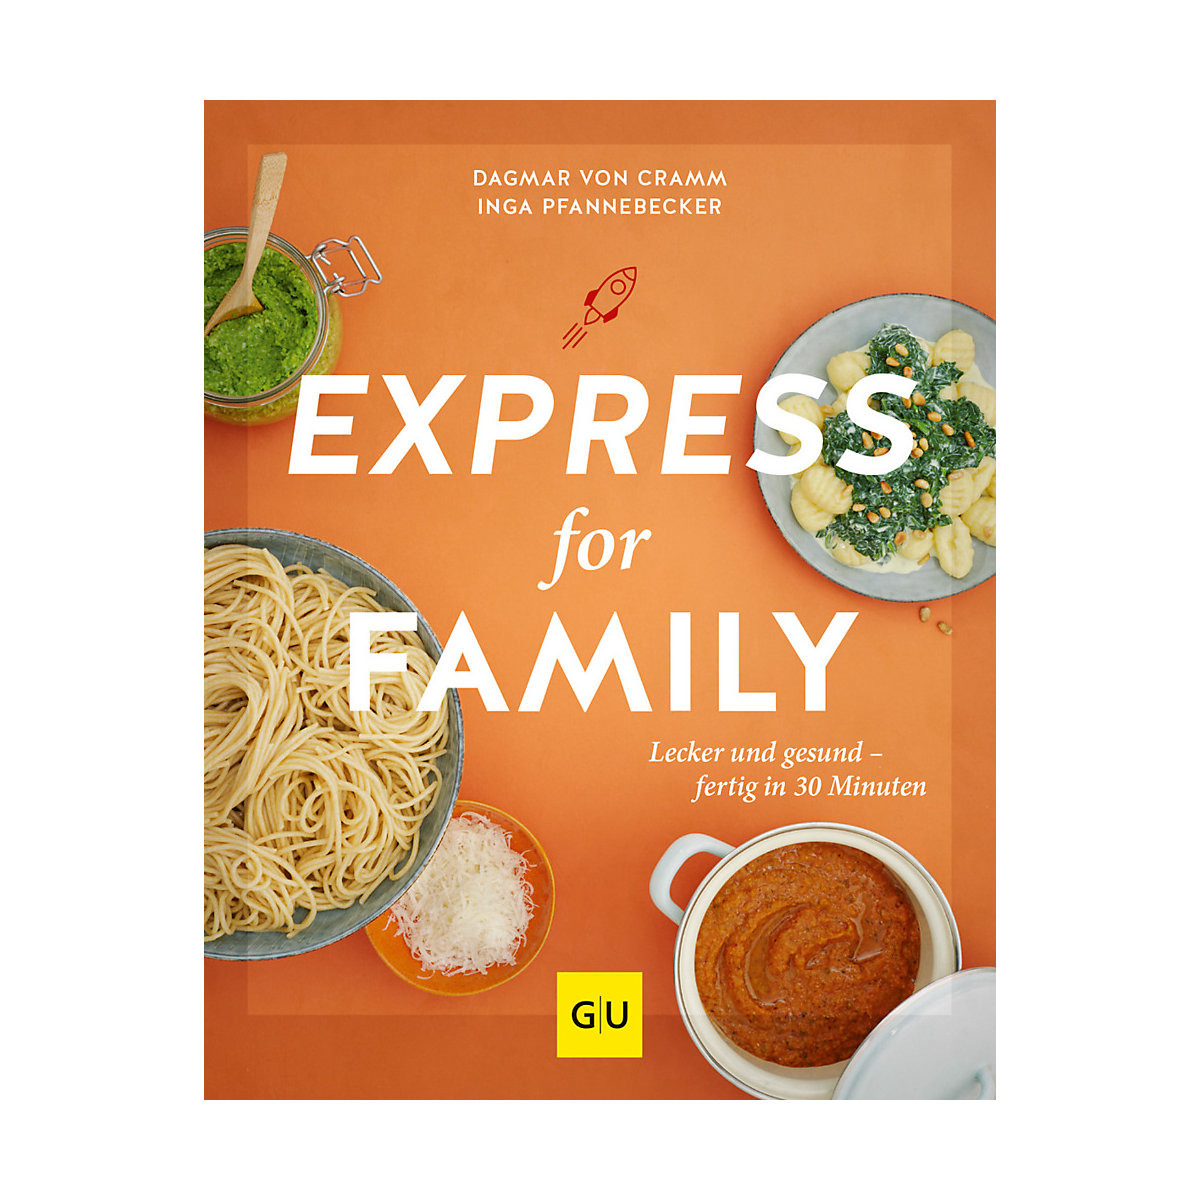 Express for Family